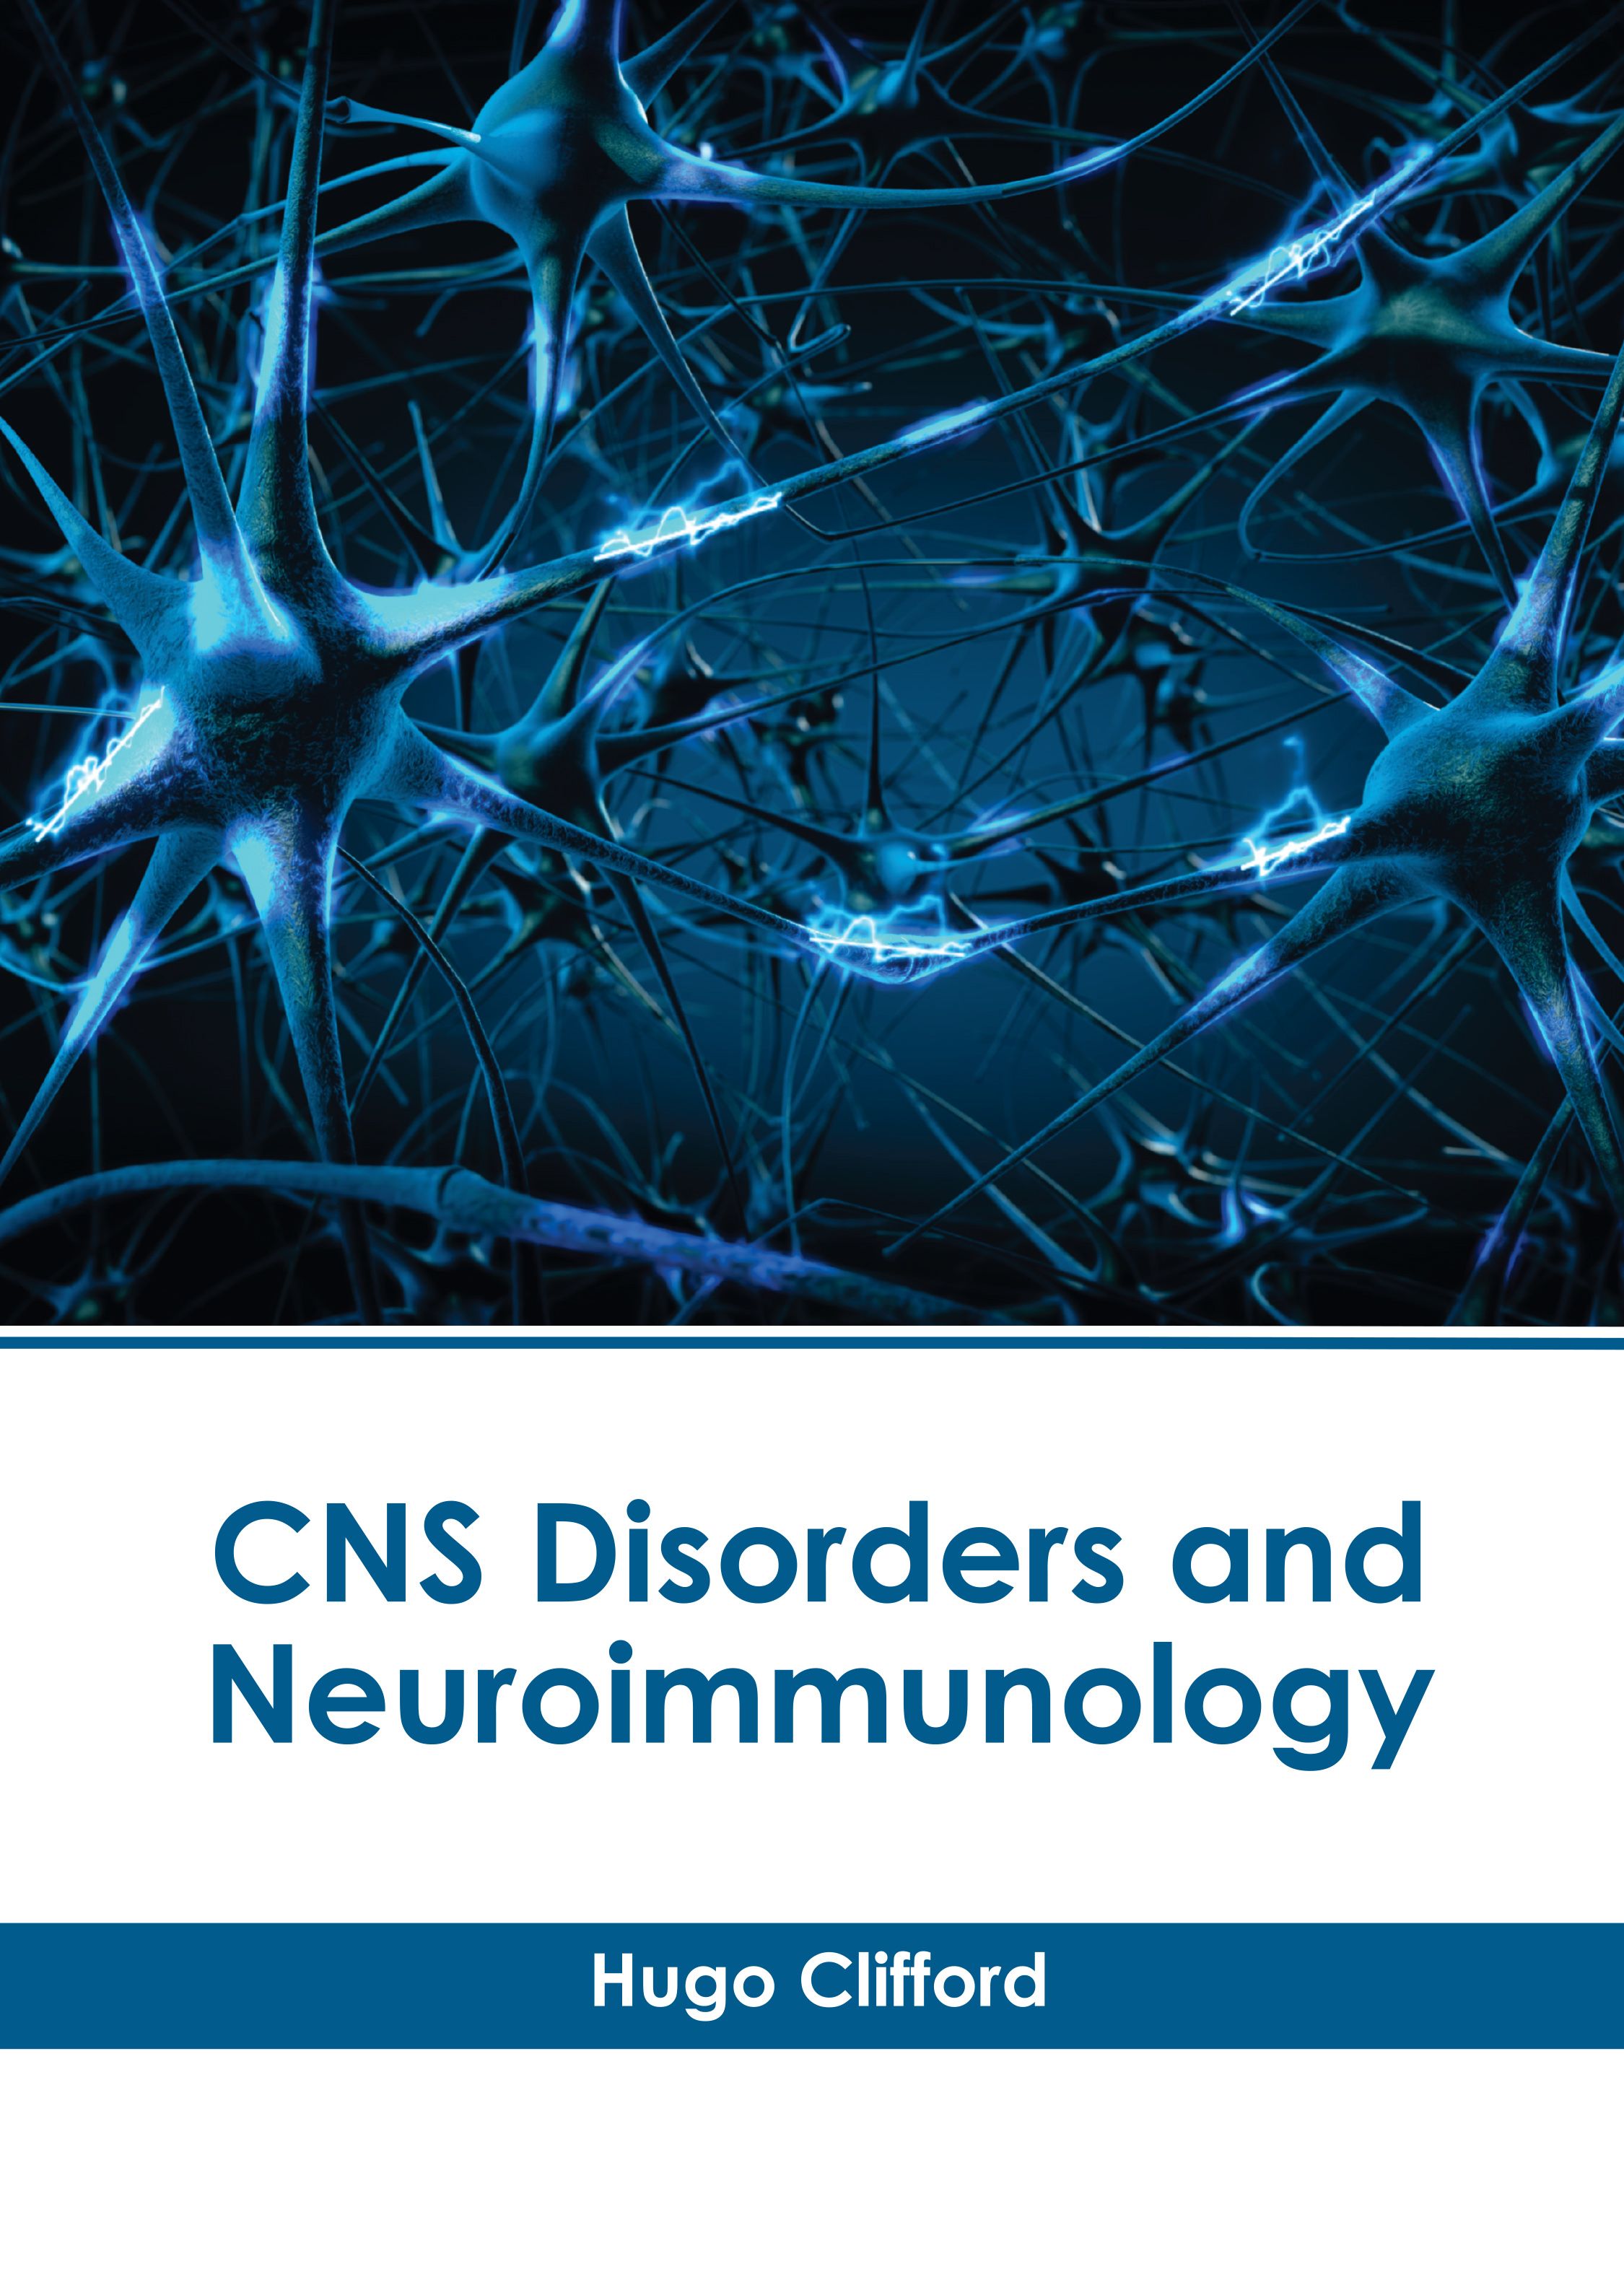 CNS DISORDERS AND NEUROIMMUNOLOGY